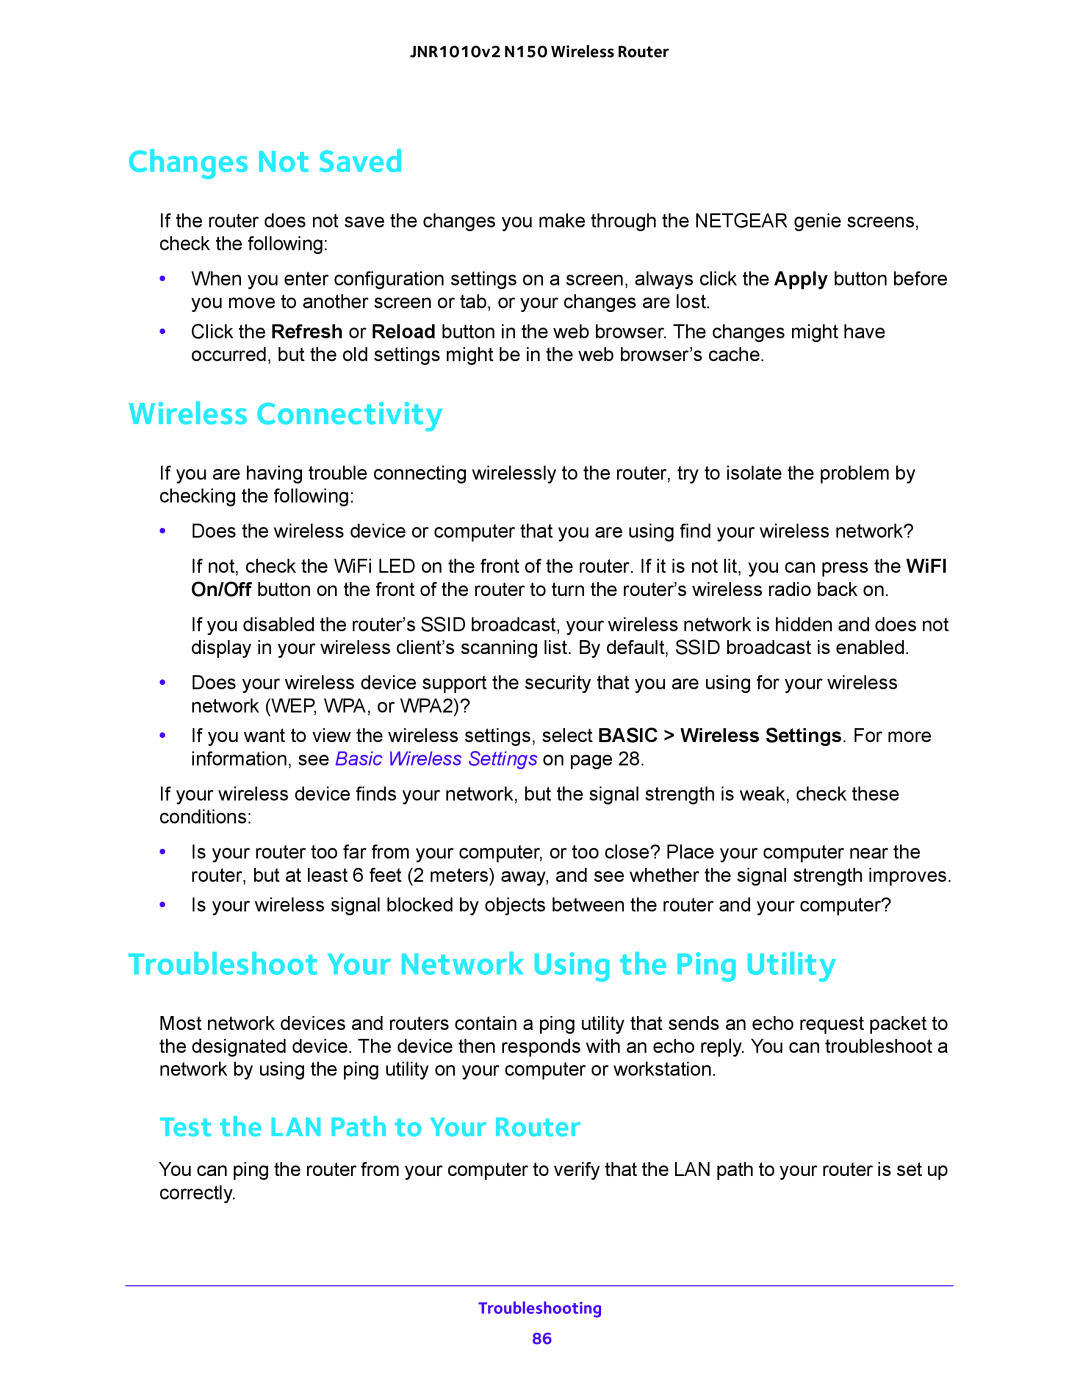 NETGEAR JNR1010V2 user manual Changes Not Saved, Wireless Connectivity, Troubleshoot Your Network Using the Ping Utility 